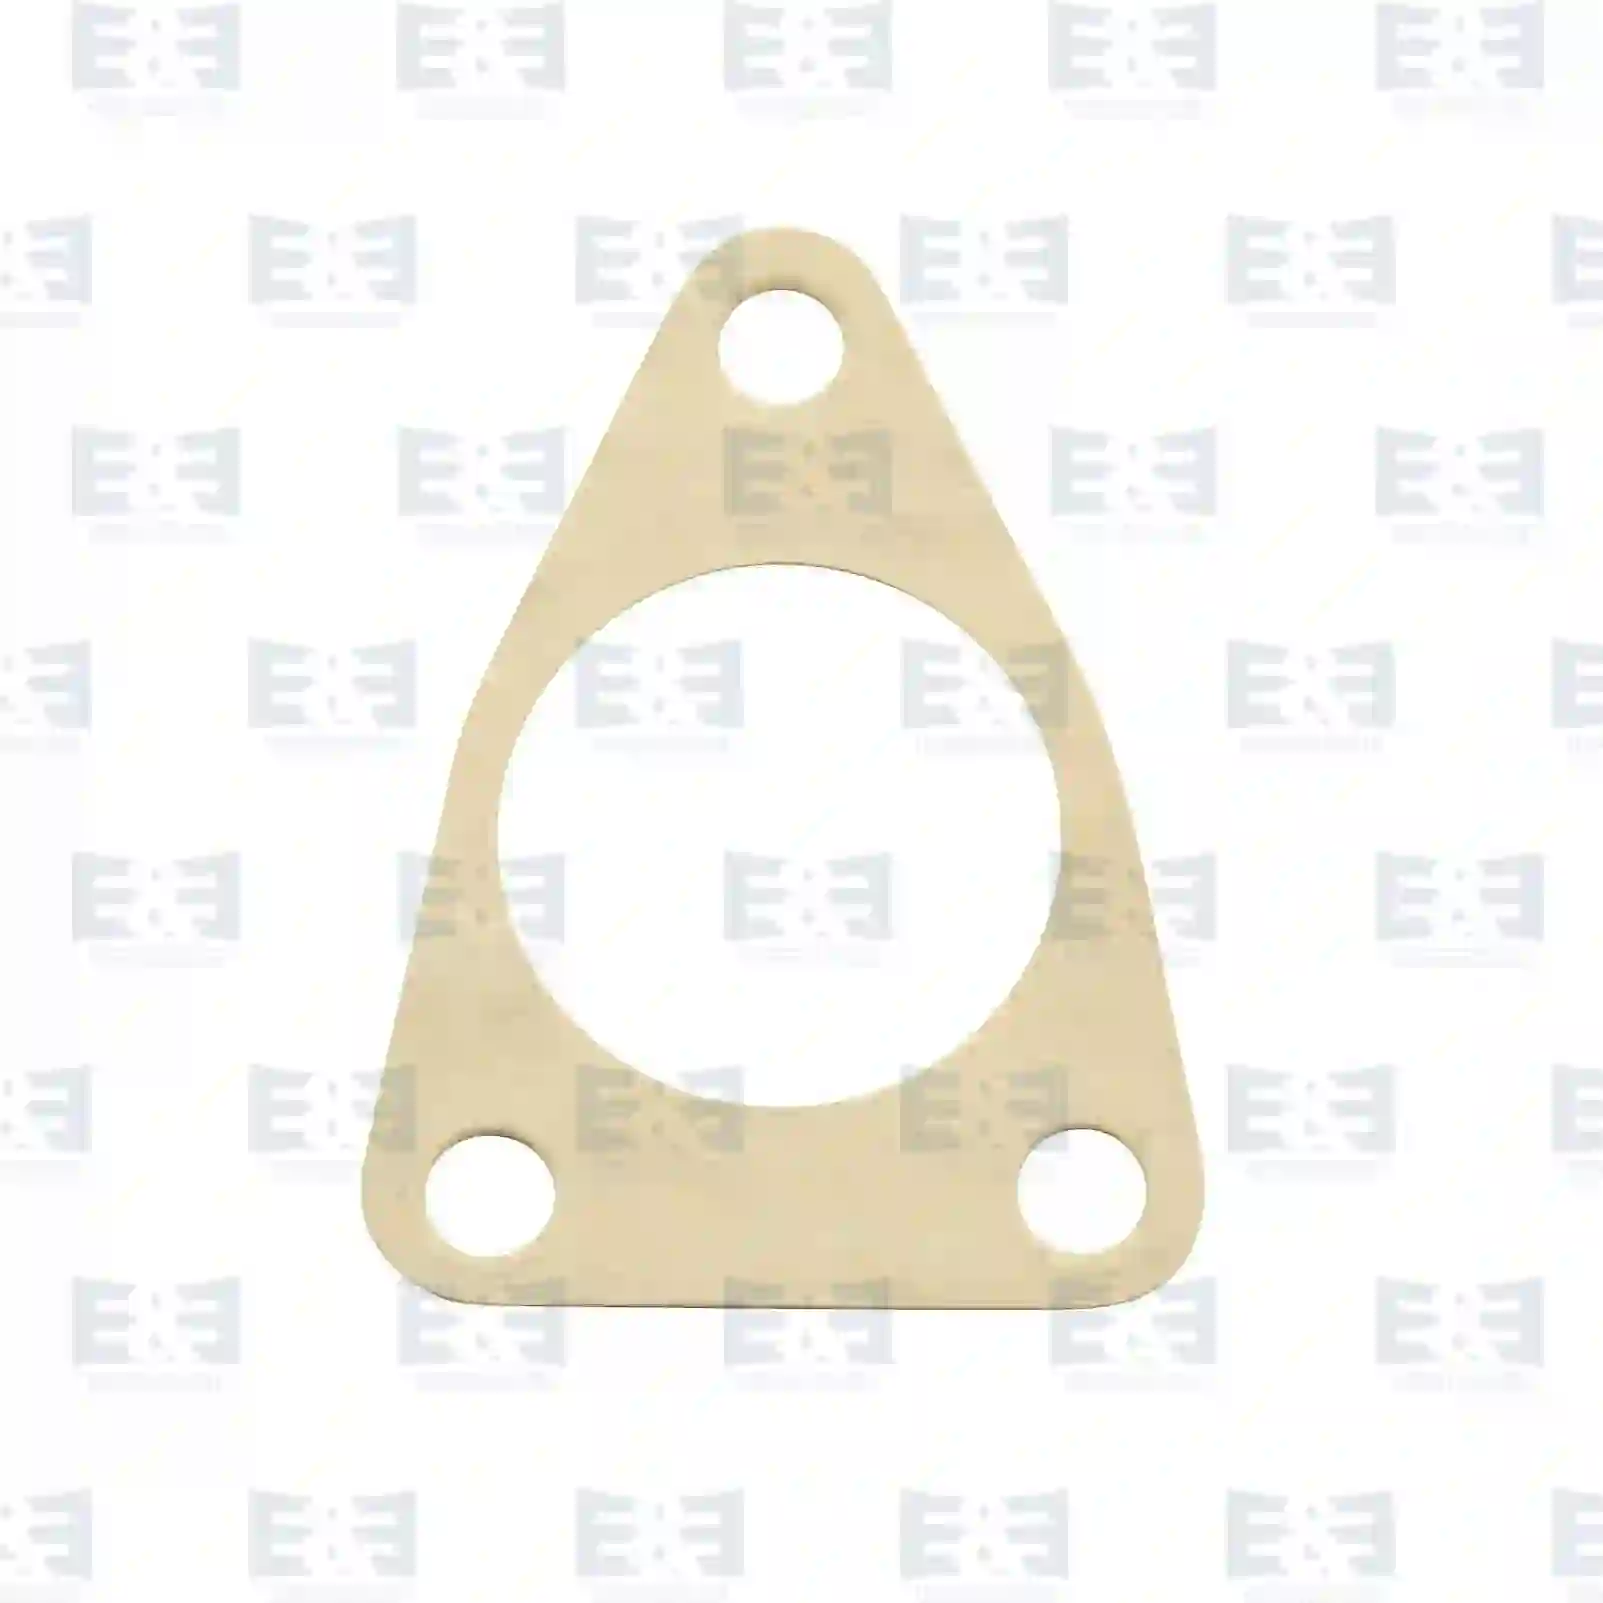 Feed Pump Gasket, feed pump, EE No 2E2287874 ,  oem no:0242194, 1228152, 1778673, 242194, 81119040014, 81119040020, 0000749880, 0000910580, 0000911280, 0000911880, 0010740980, 0010742280, 1112908, 1114640, 210854, 280836, 6232208, 863370, ZG10438-0008 E&E Truck Spare Parts | Truck Spare Parts, Auotomotive Spare Parts